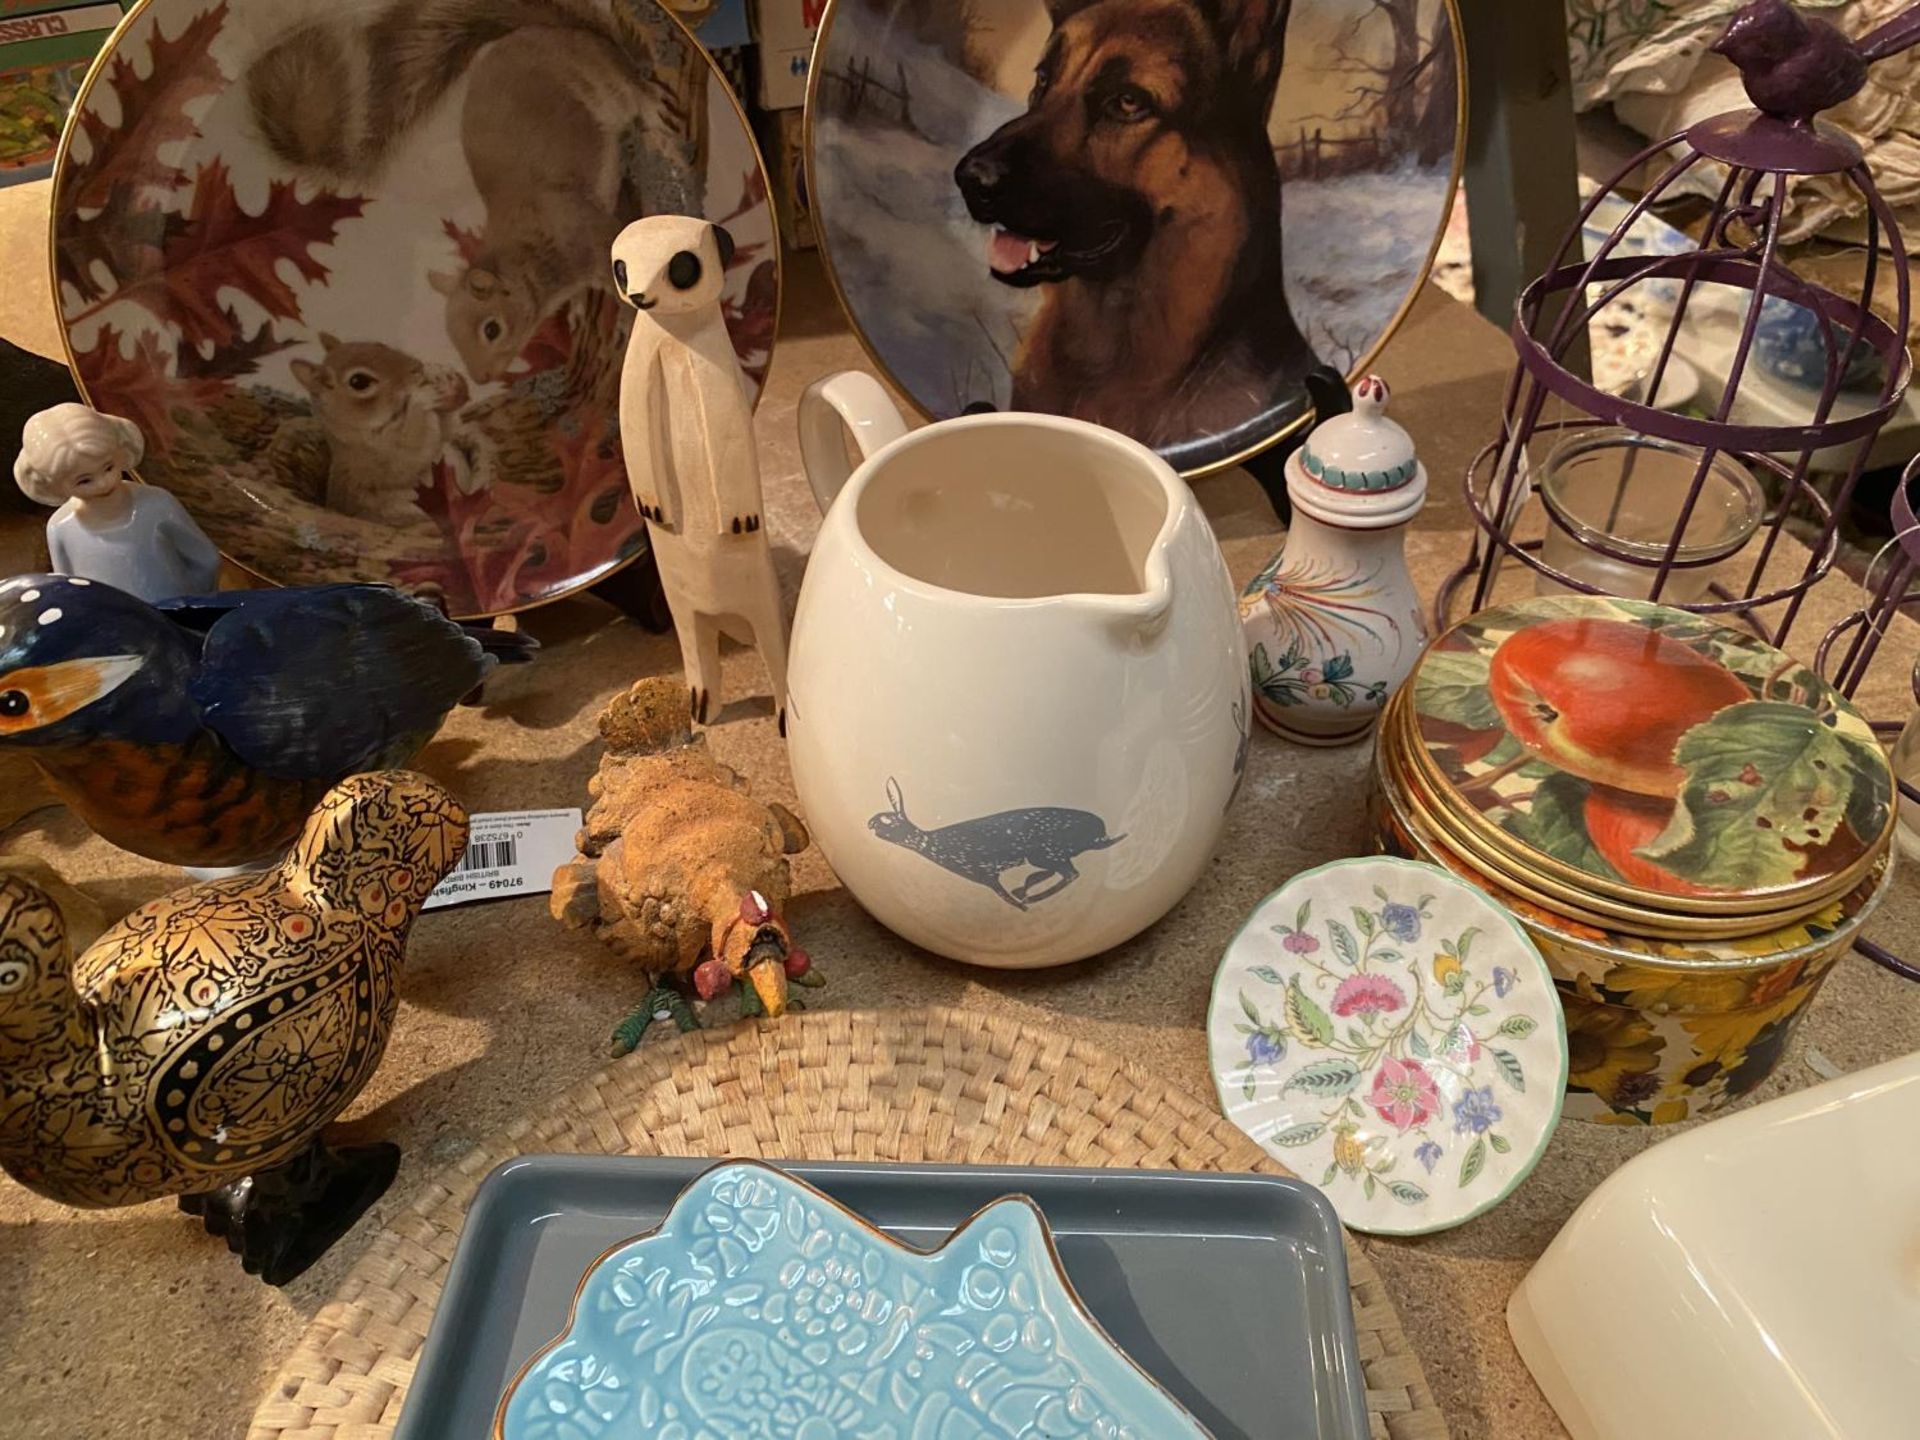 A LARGE COLLECTION OF ITEMS TO INCLUDE SEVERAL ANIMAL FIGURINES, DECORATIVE PLATES AND TRINKET - Image 4 of 6